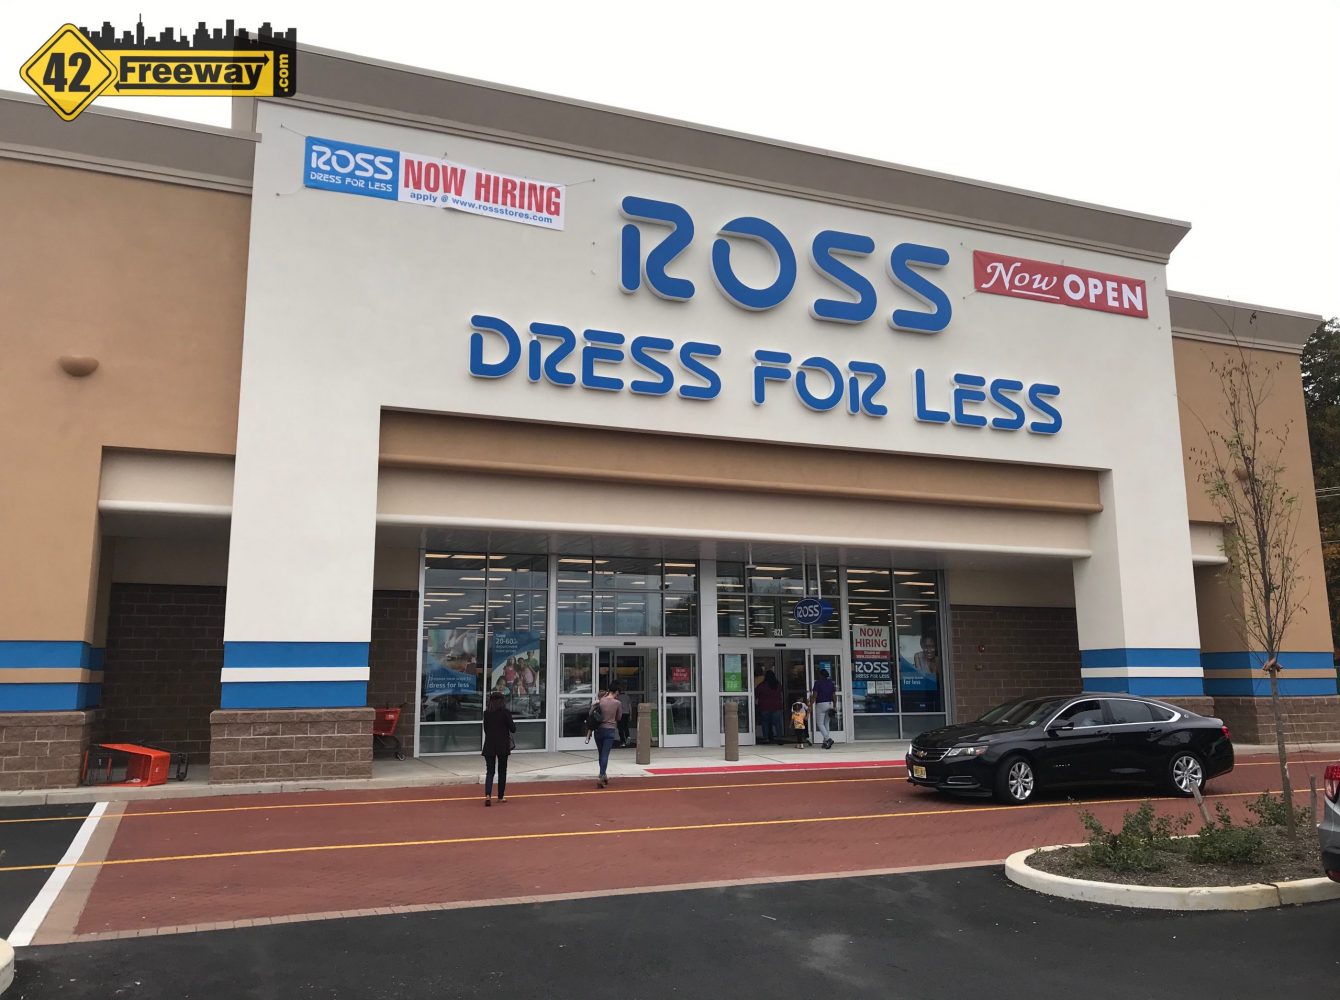 [Download 31+] Ross Dress For Less Near Me Now